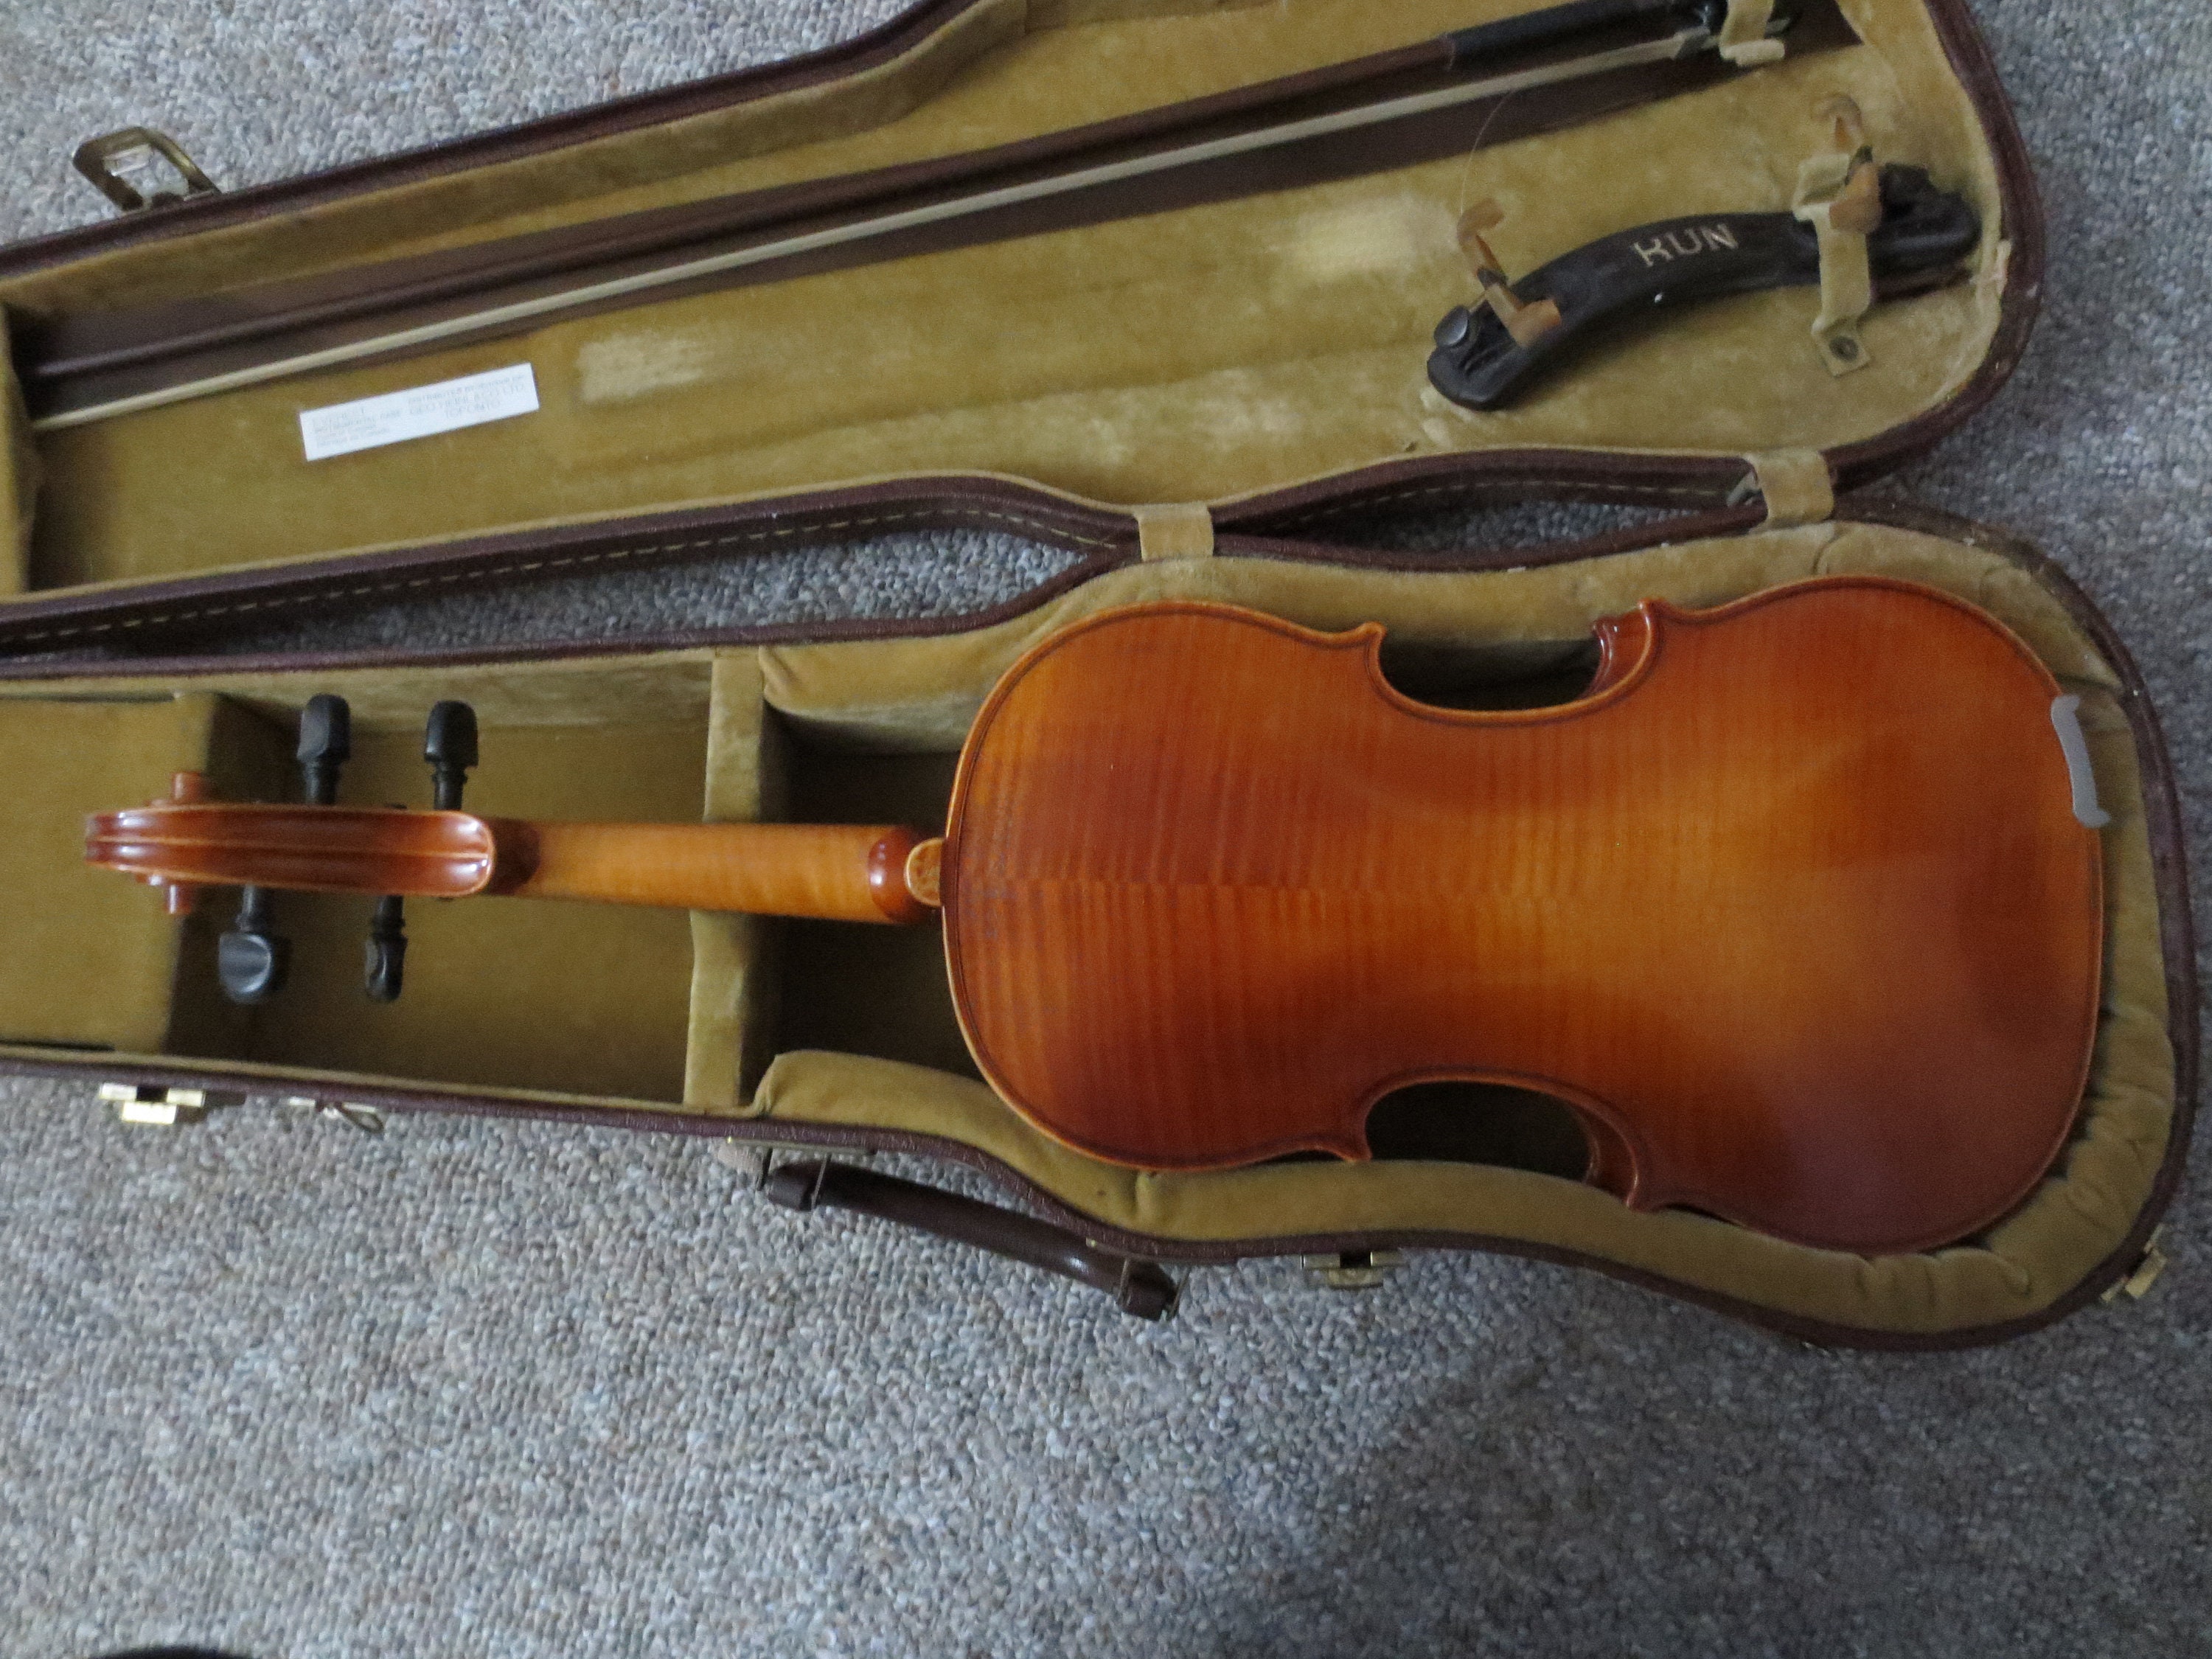 Used) St. Louis 4/4 Cello Kit W/ Bow and Bag